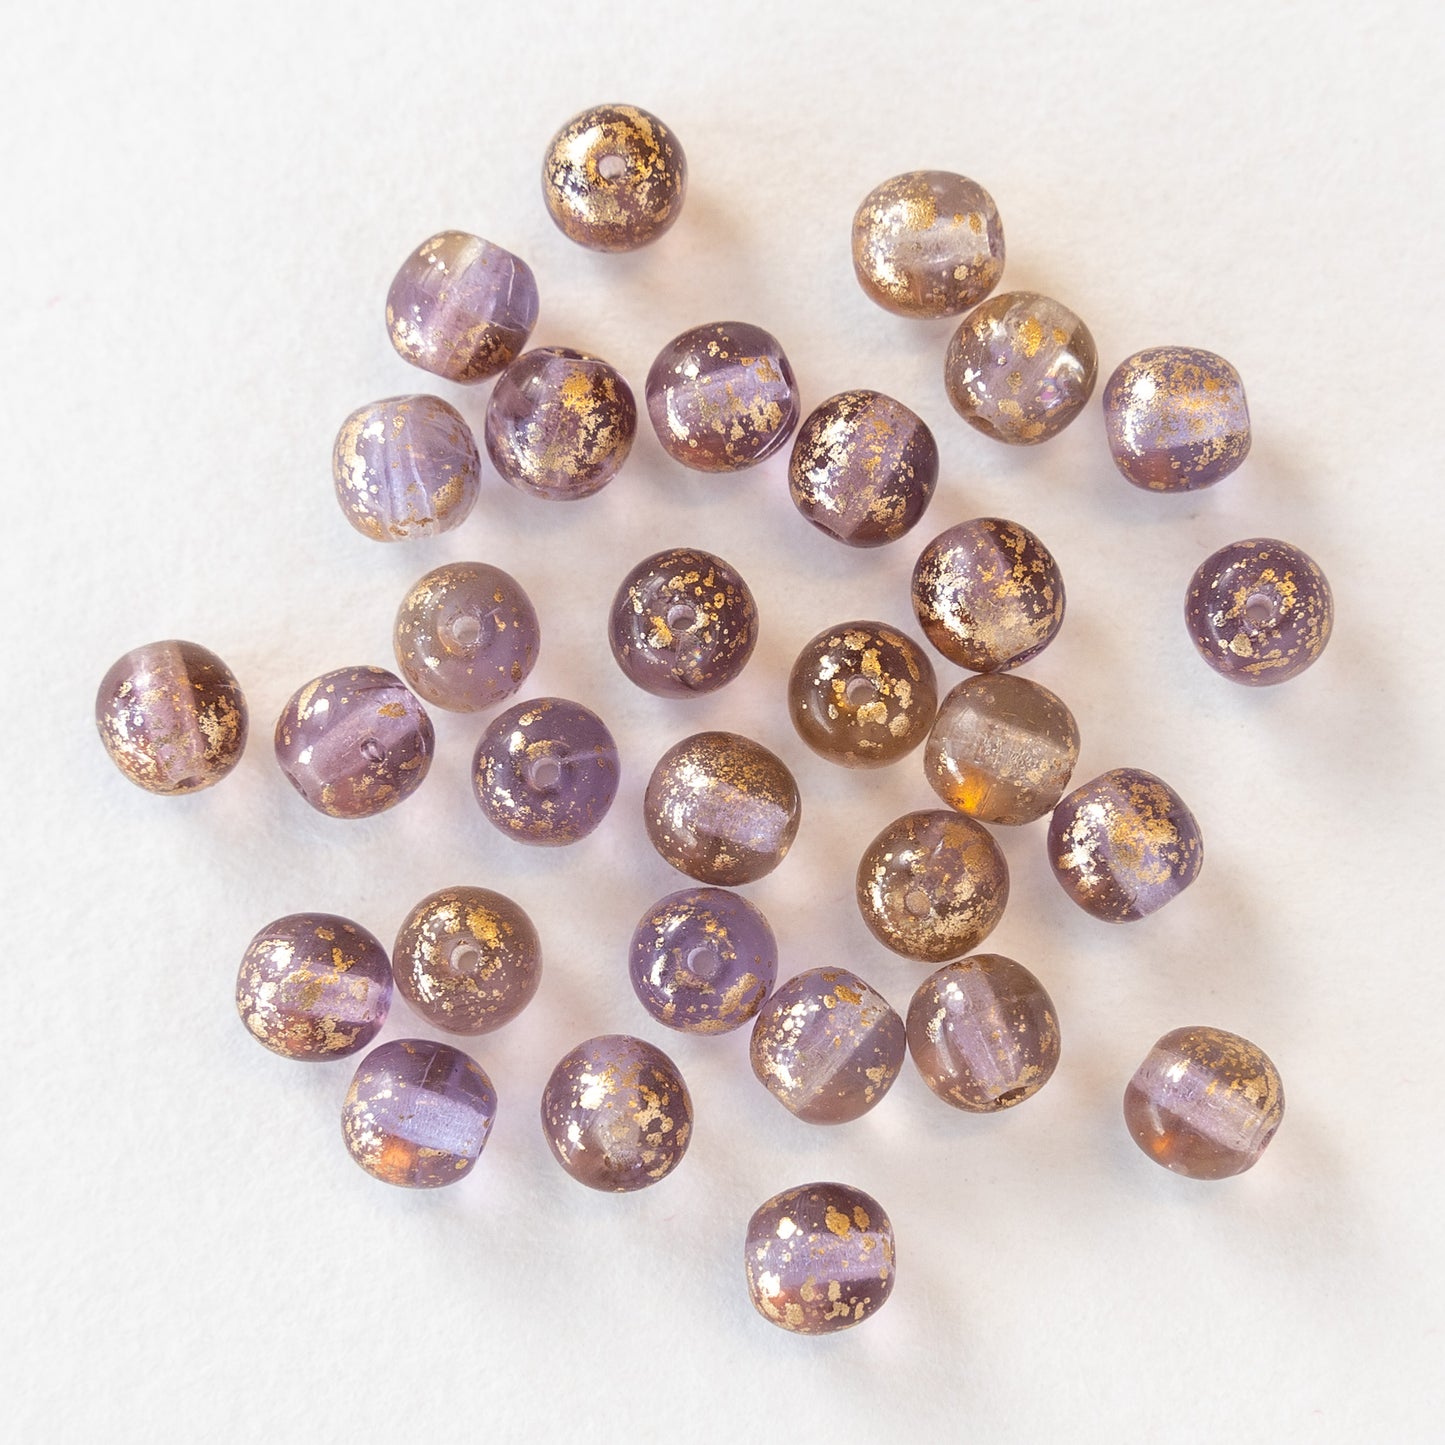 6mm Round Glass Beads - Lavender with Gold Dust - 30 Beads